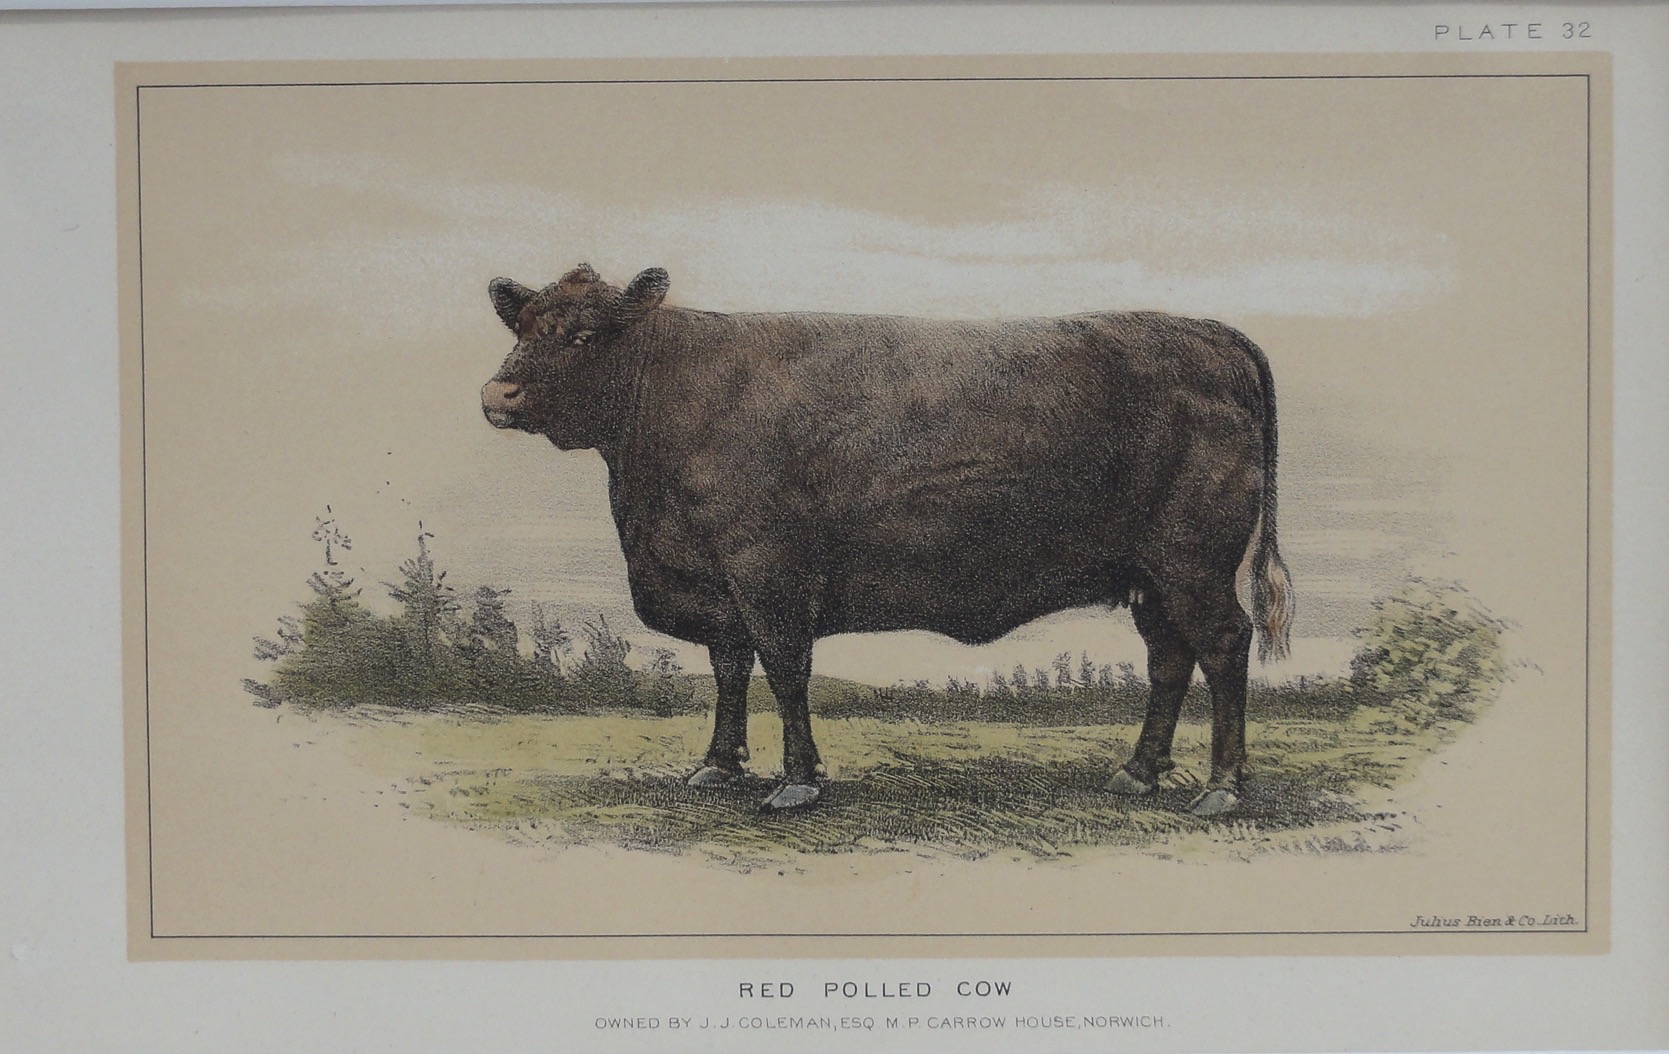 Red Polled Cow